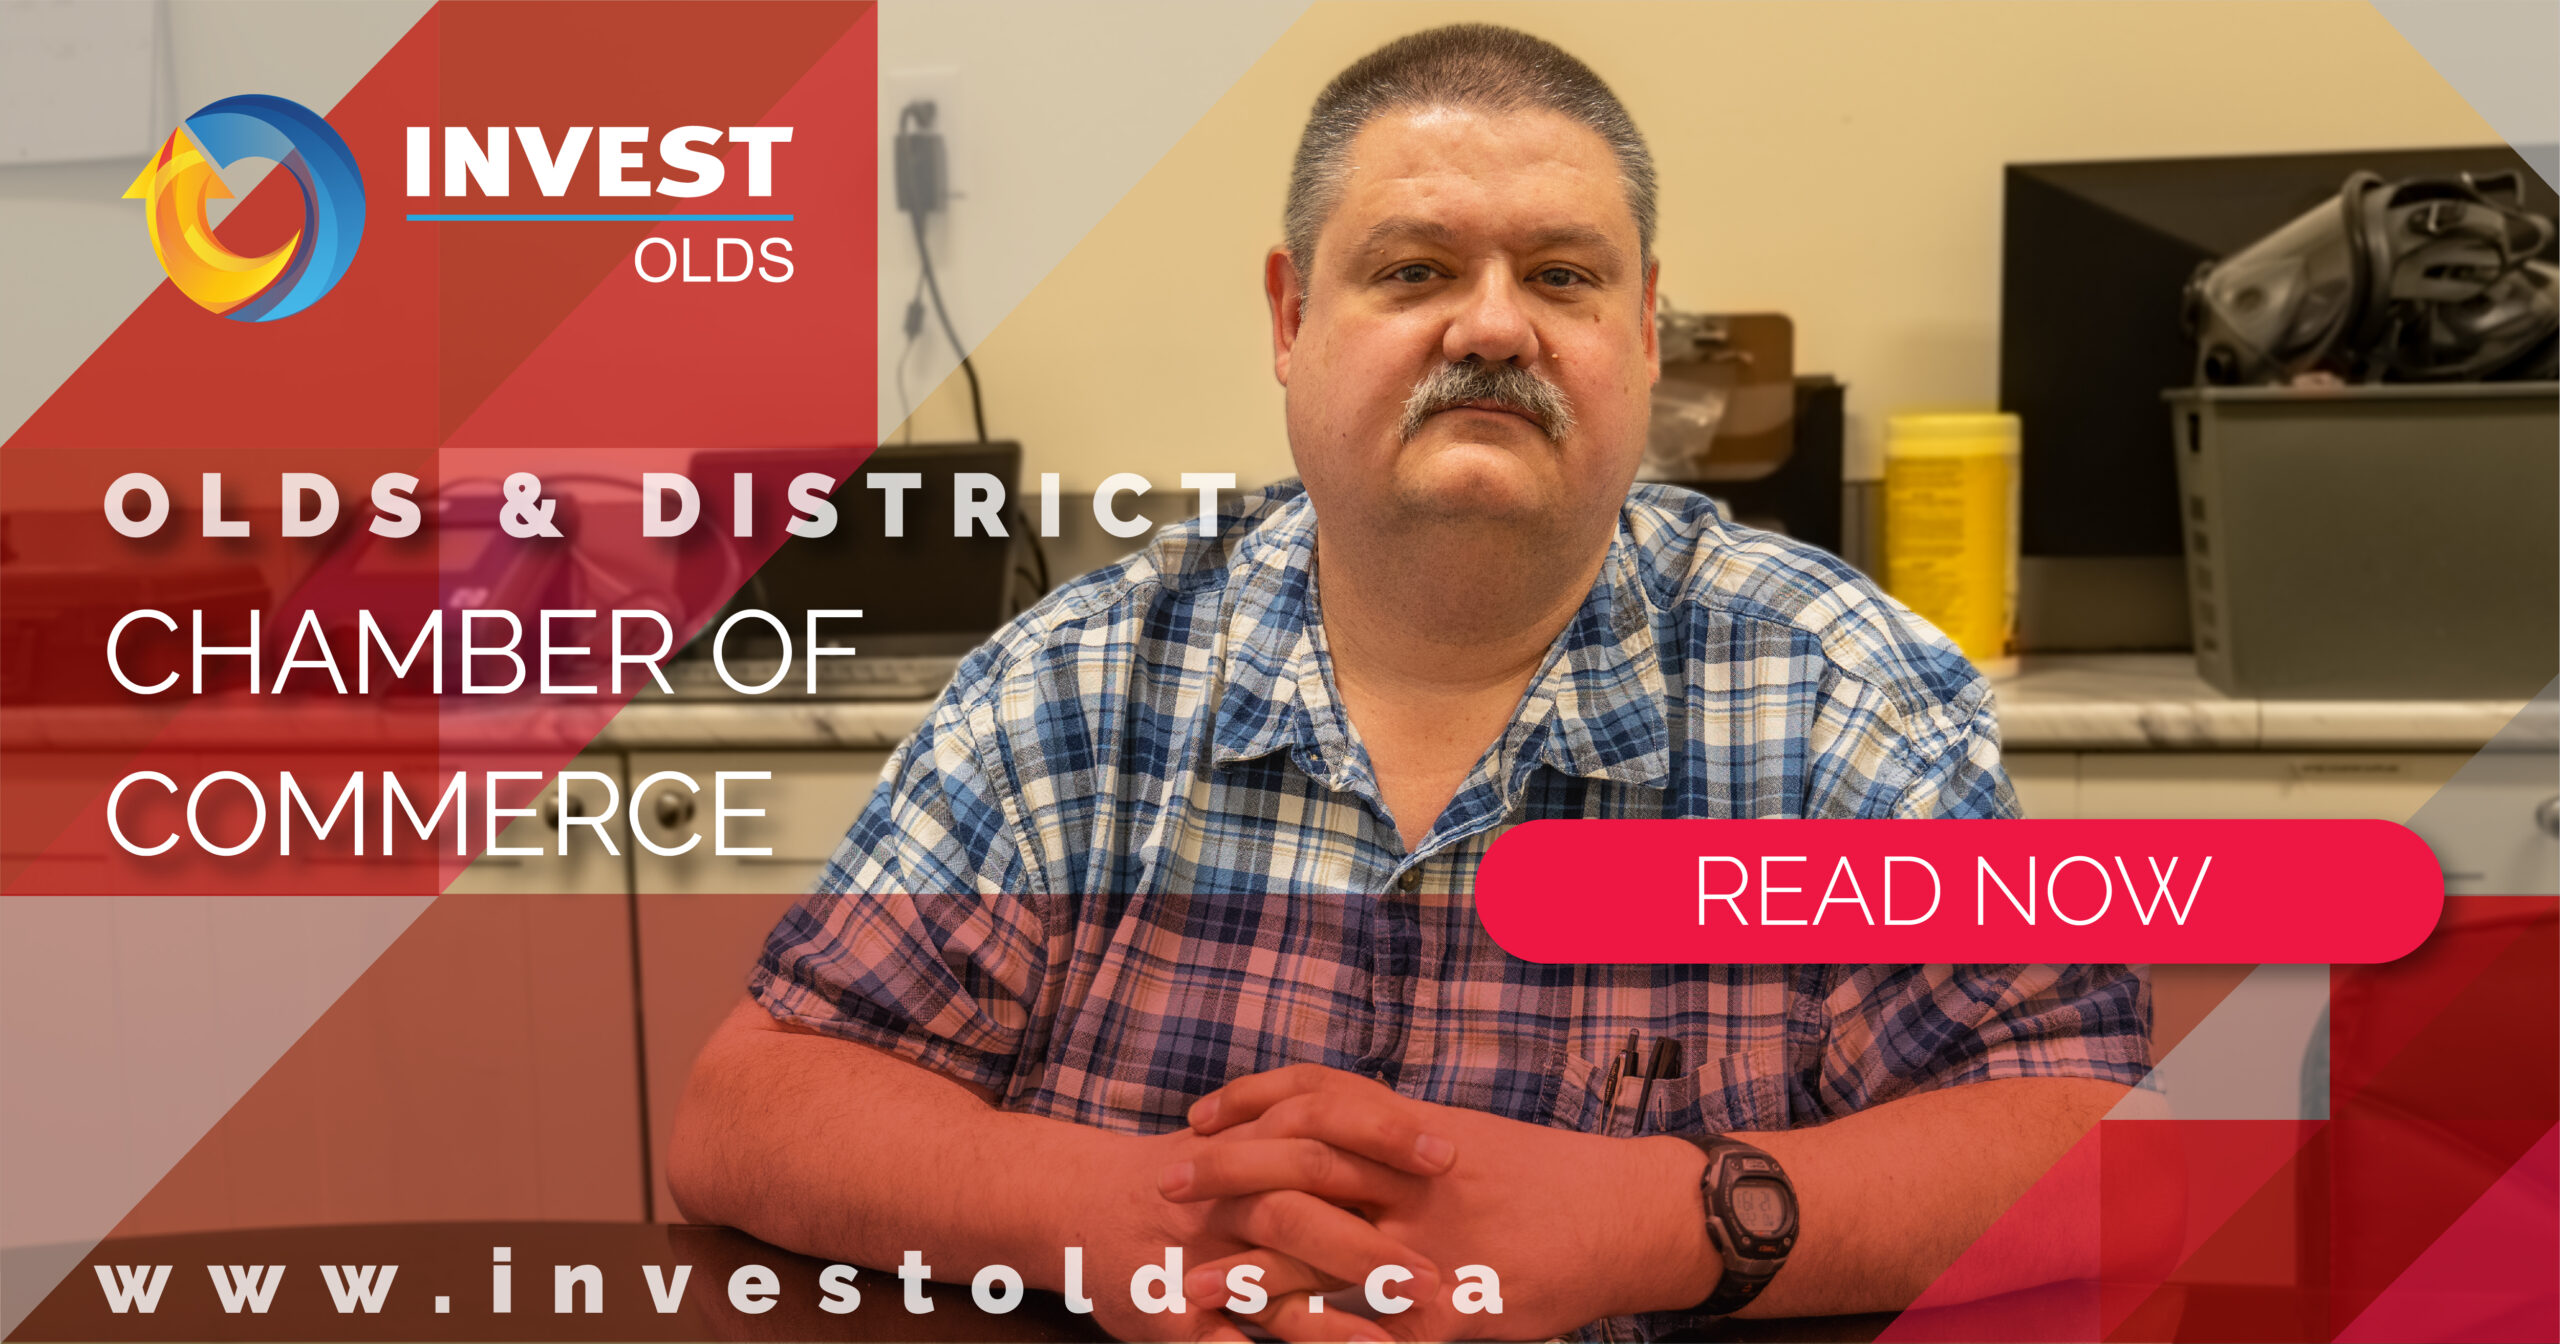 Olds & District Chamber Of Commerce: Nurturing Business Growth and Community Spirit